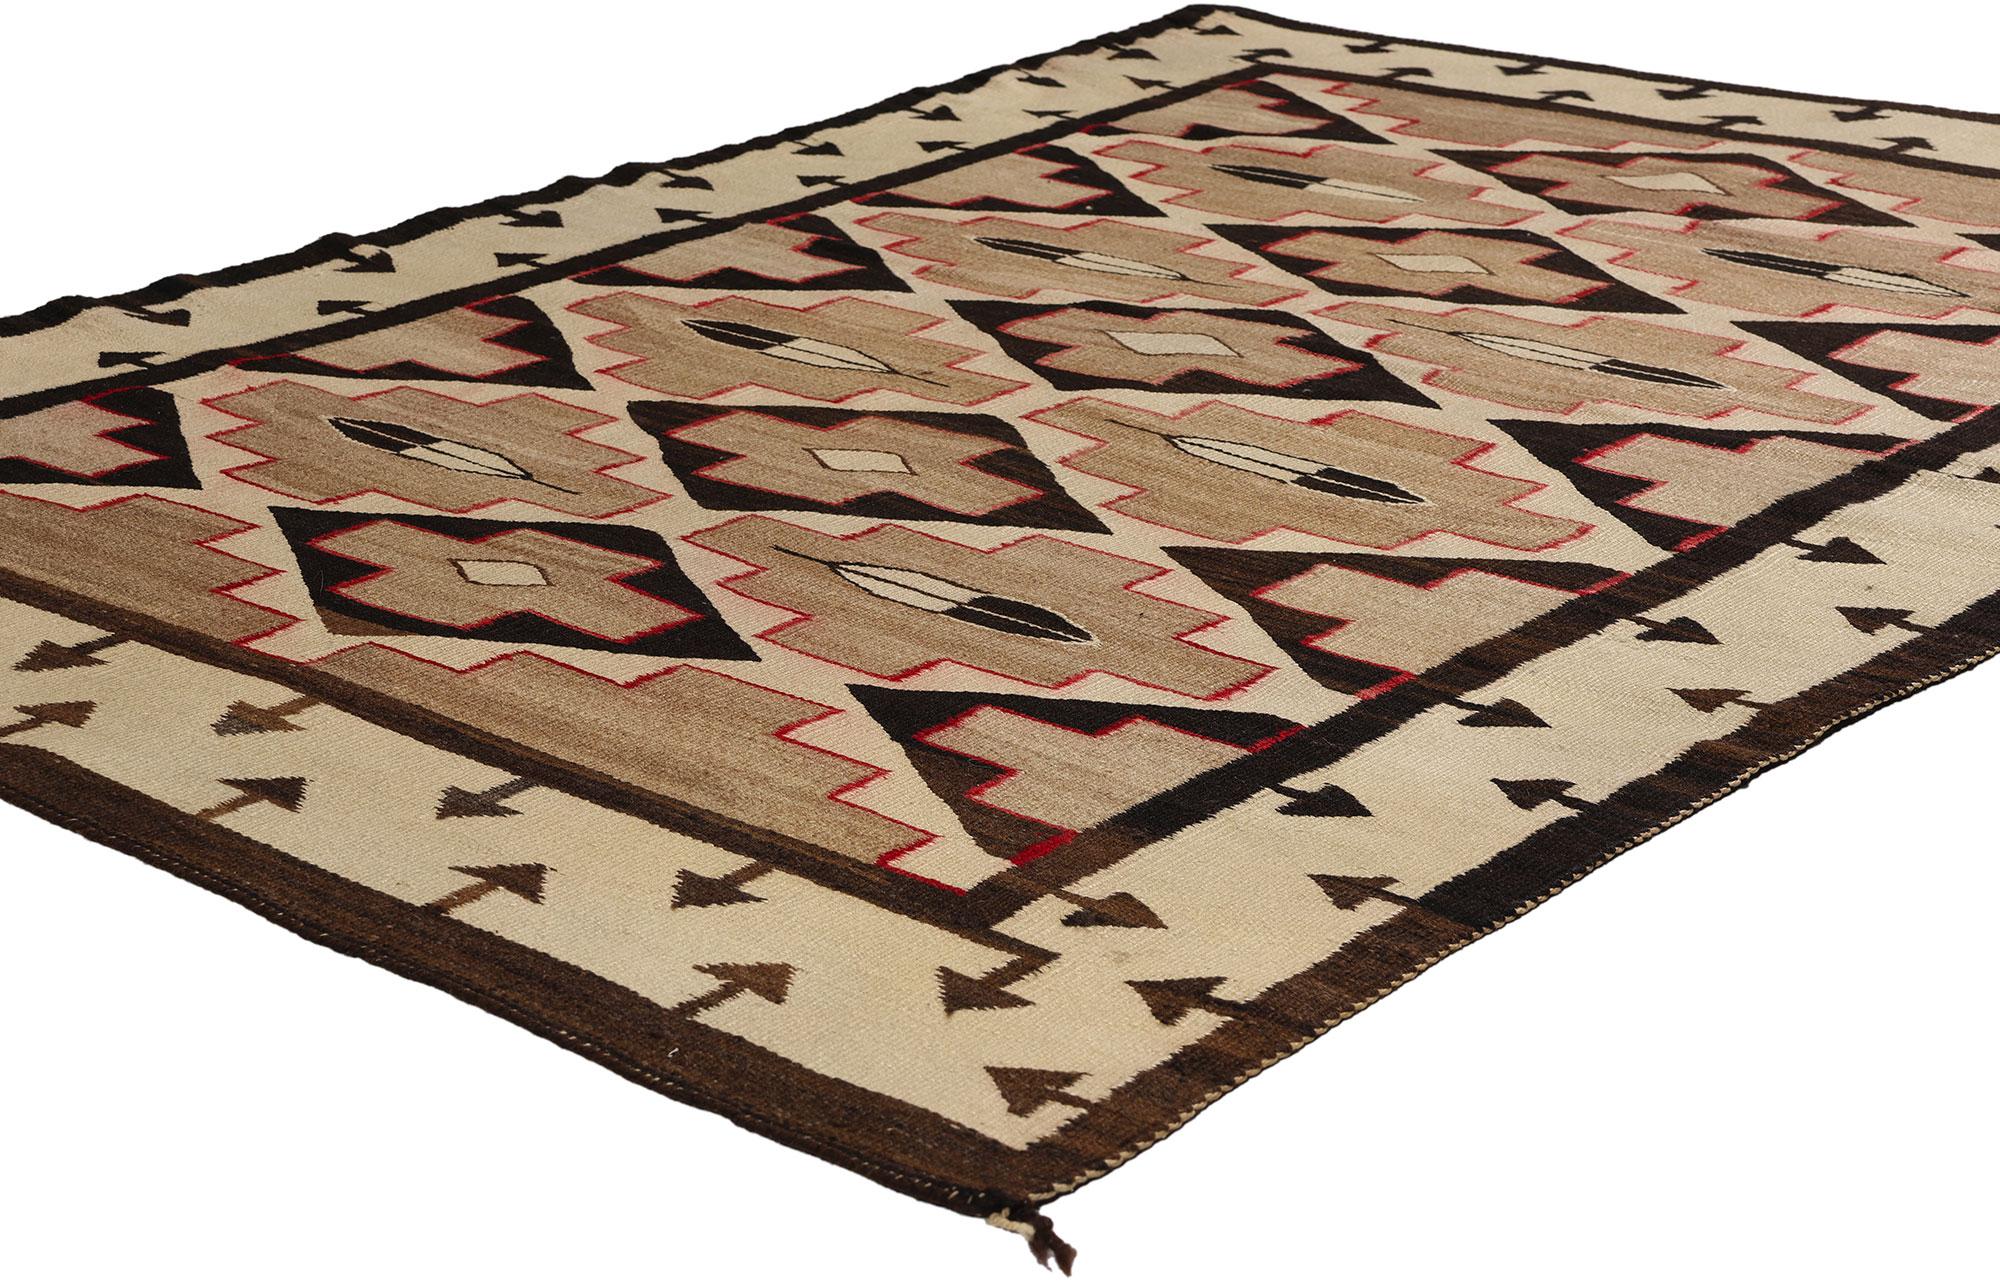 78723 Antique Crystal Navajo Rug, 02'06 x 05'05. Crystal Navajo rugs, originating from the Crystal area of the Navajo Nation in the southwestern United States, are revered for their exceptional craftsmanship, intricate designs, and historical